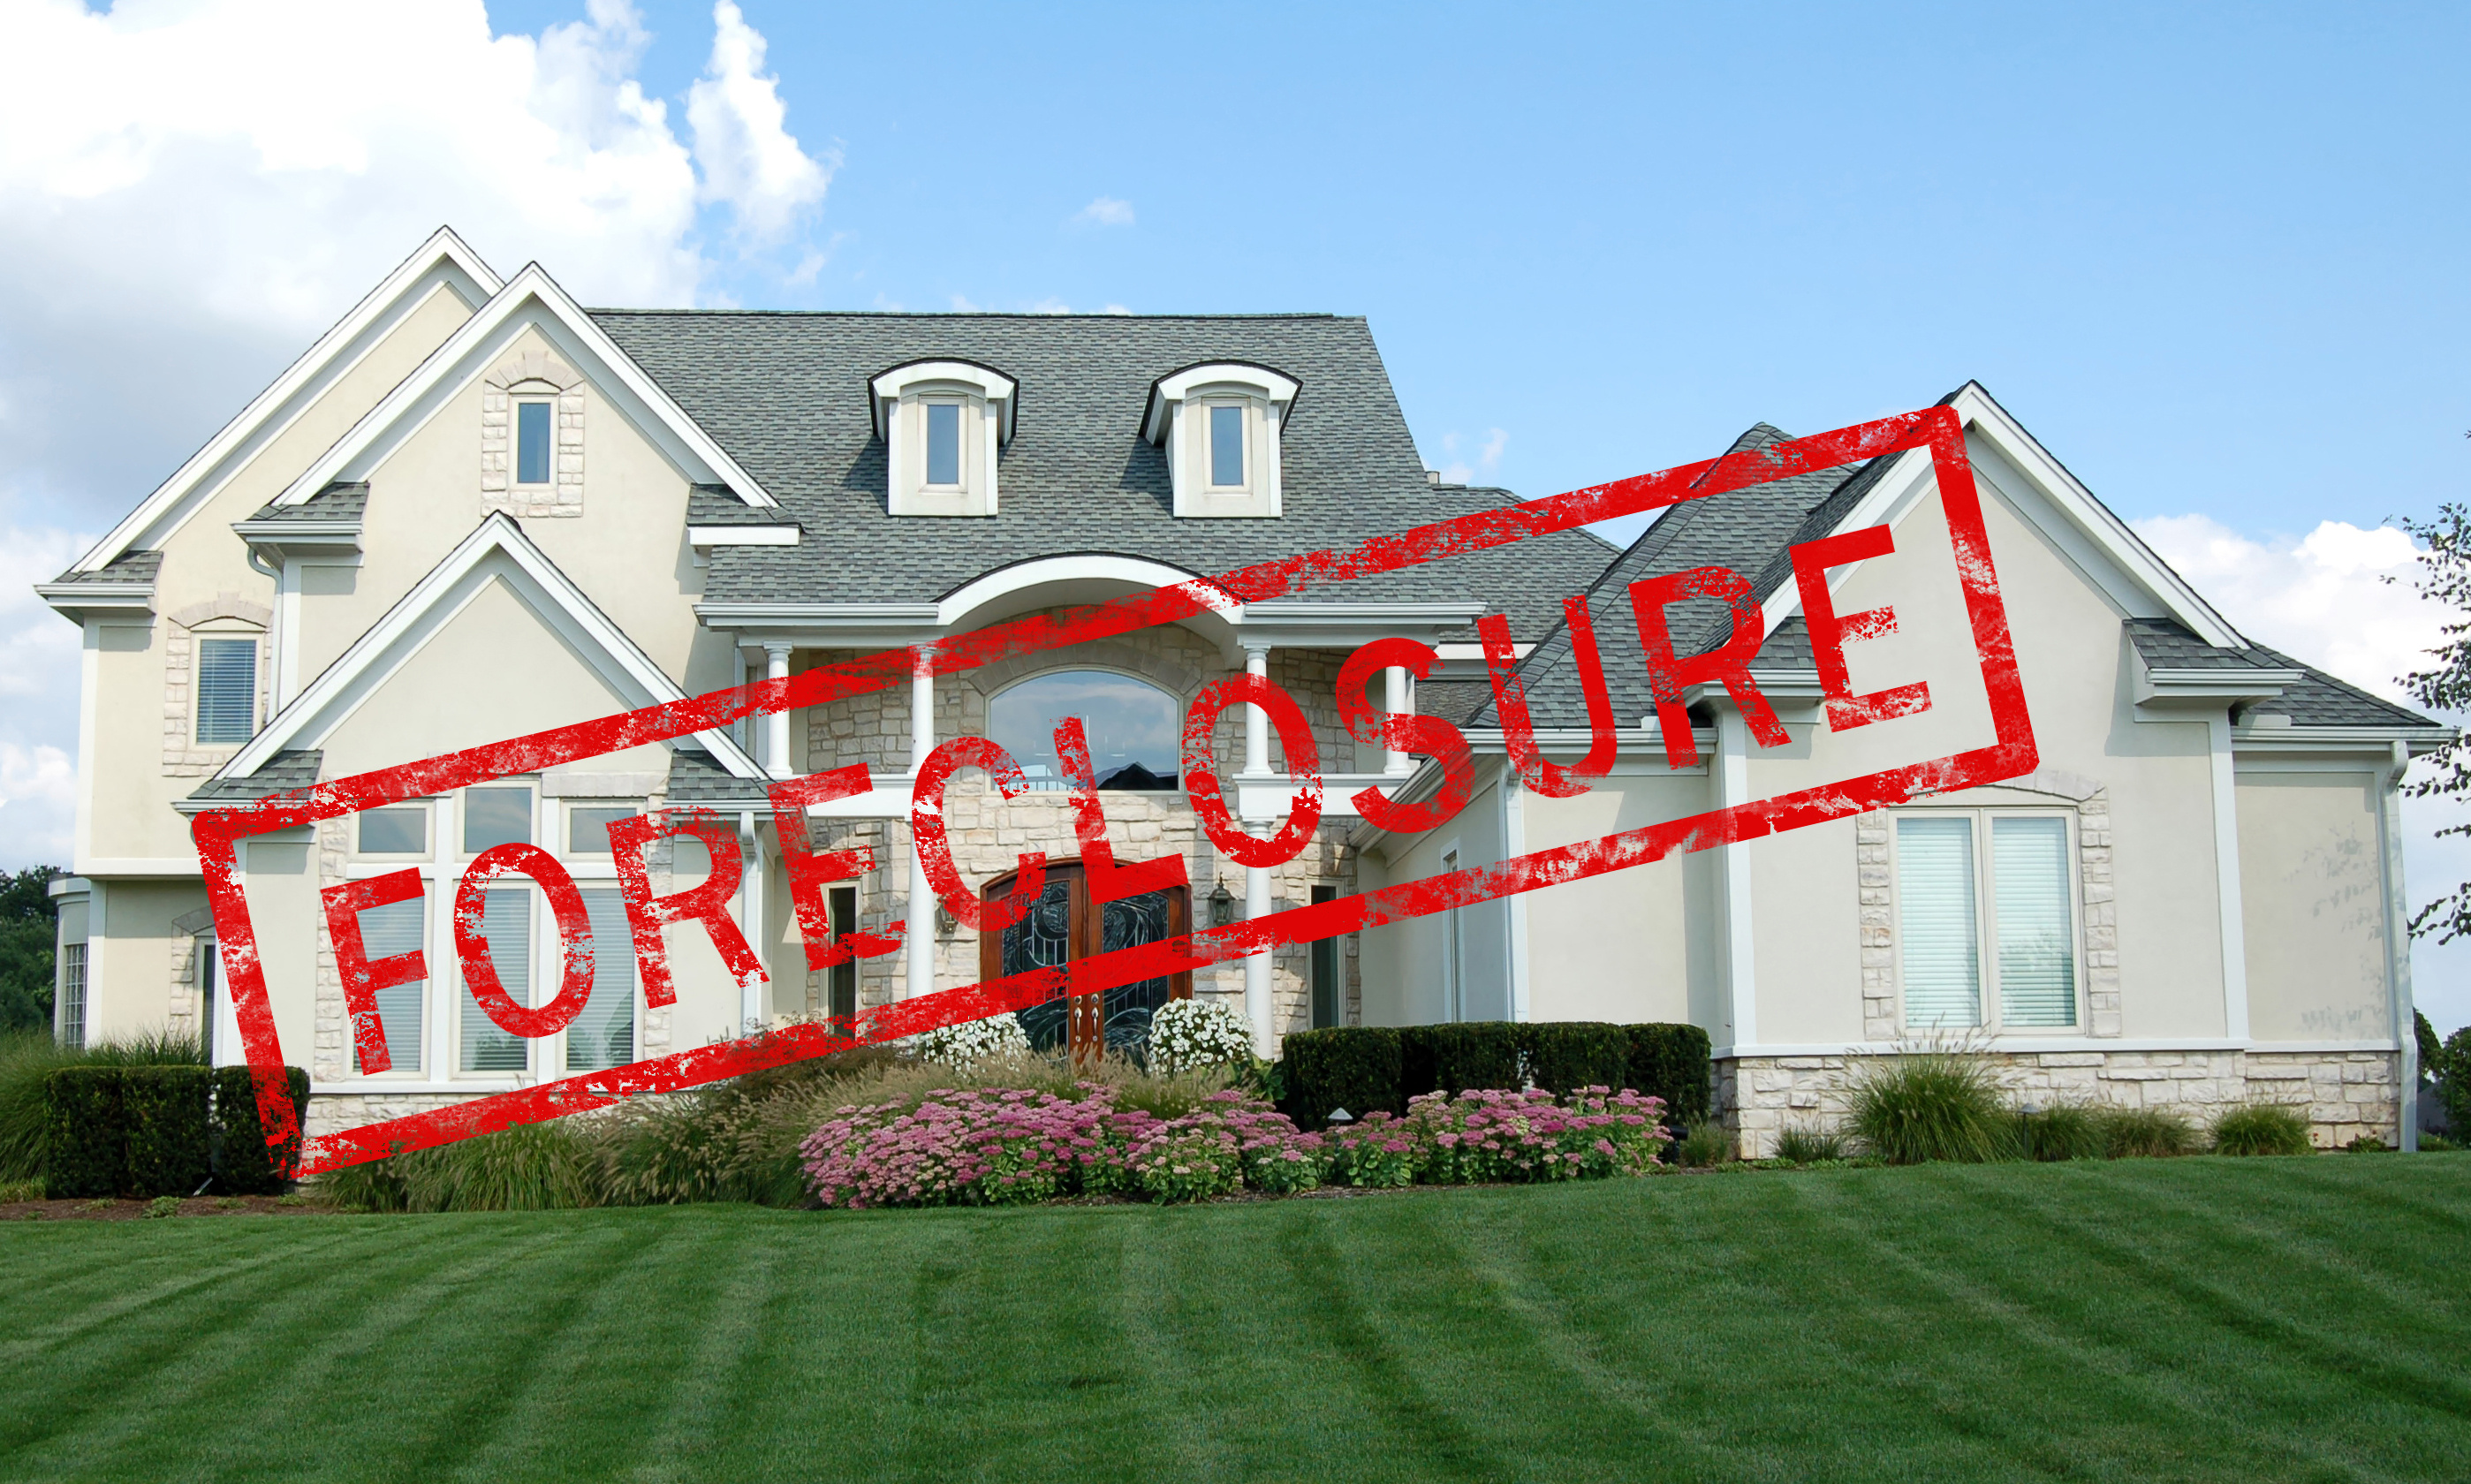 Call R.M. Rose to order valuations for Montgomery foreclosures